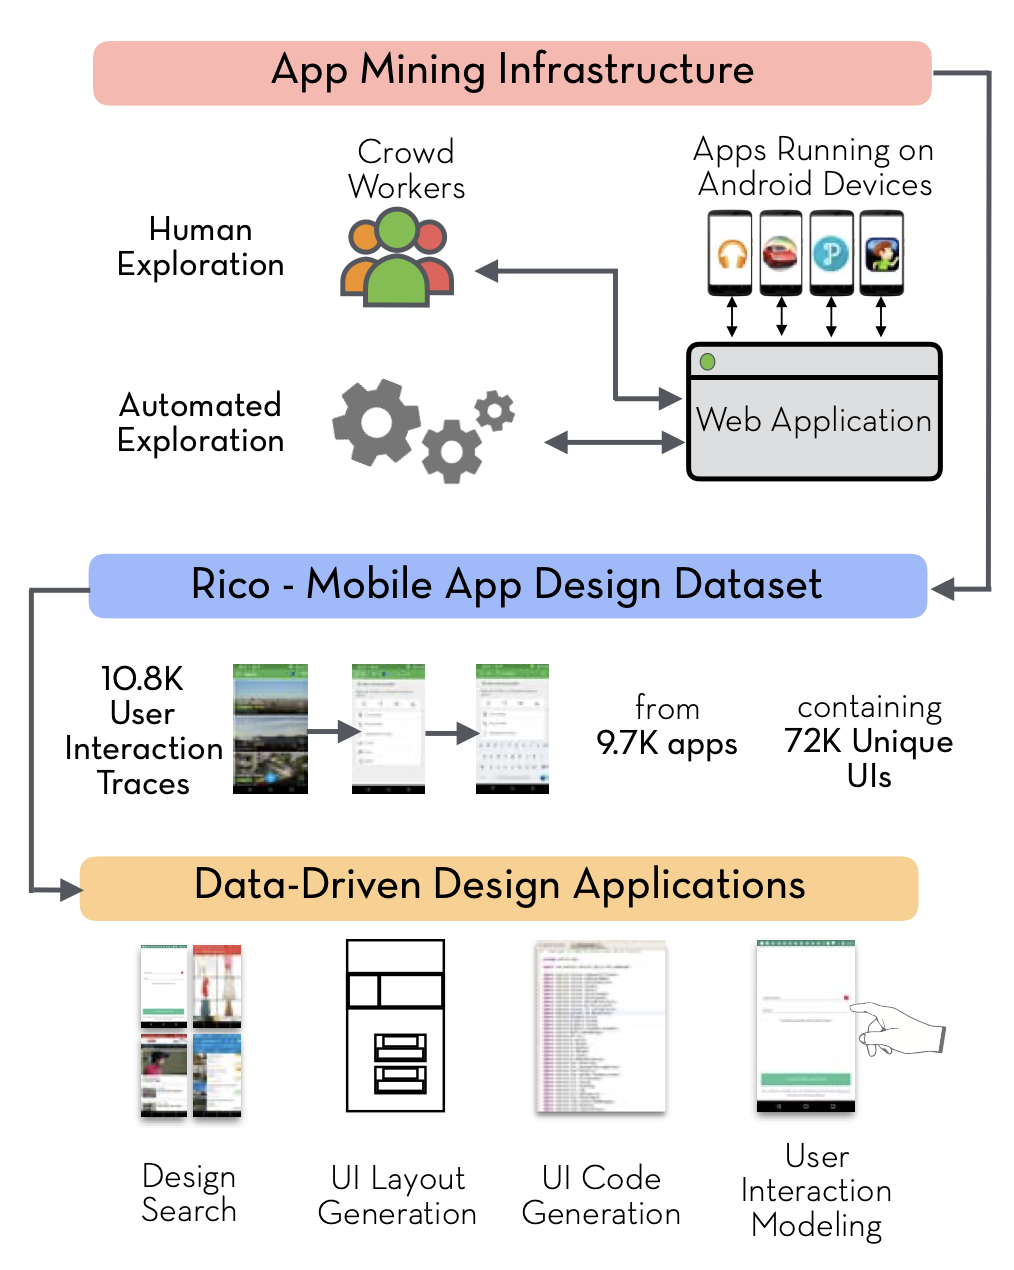 A figure from the Rico paper. It shows the Rico process: app mining with crowdworkers and automated exploration using actual Android devices, extracting UI traces, and a set of data-driven design applications like UI design search.